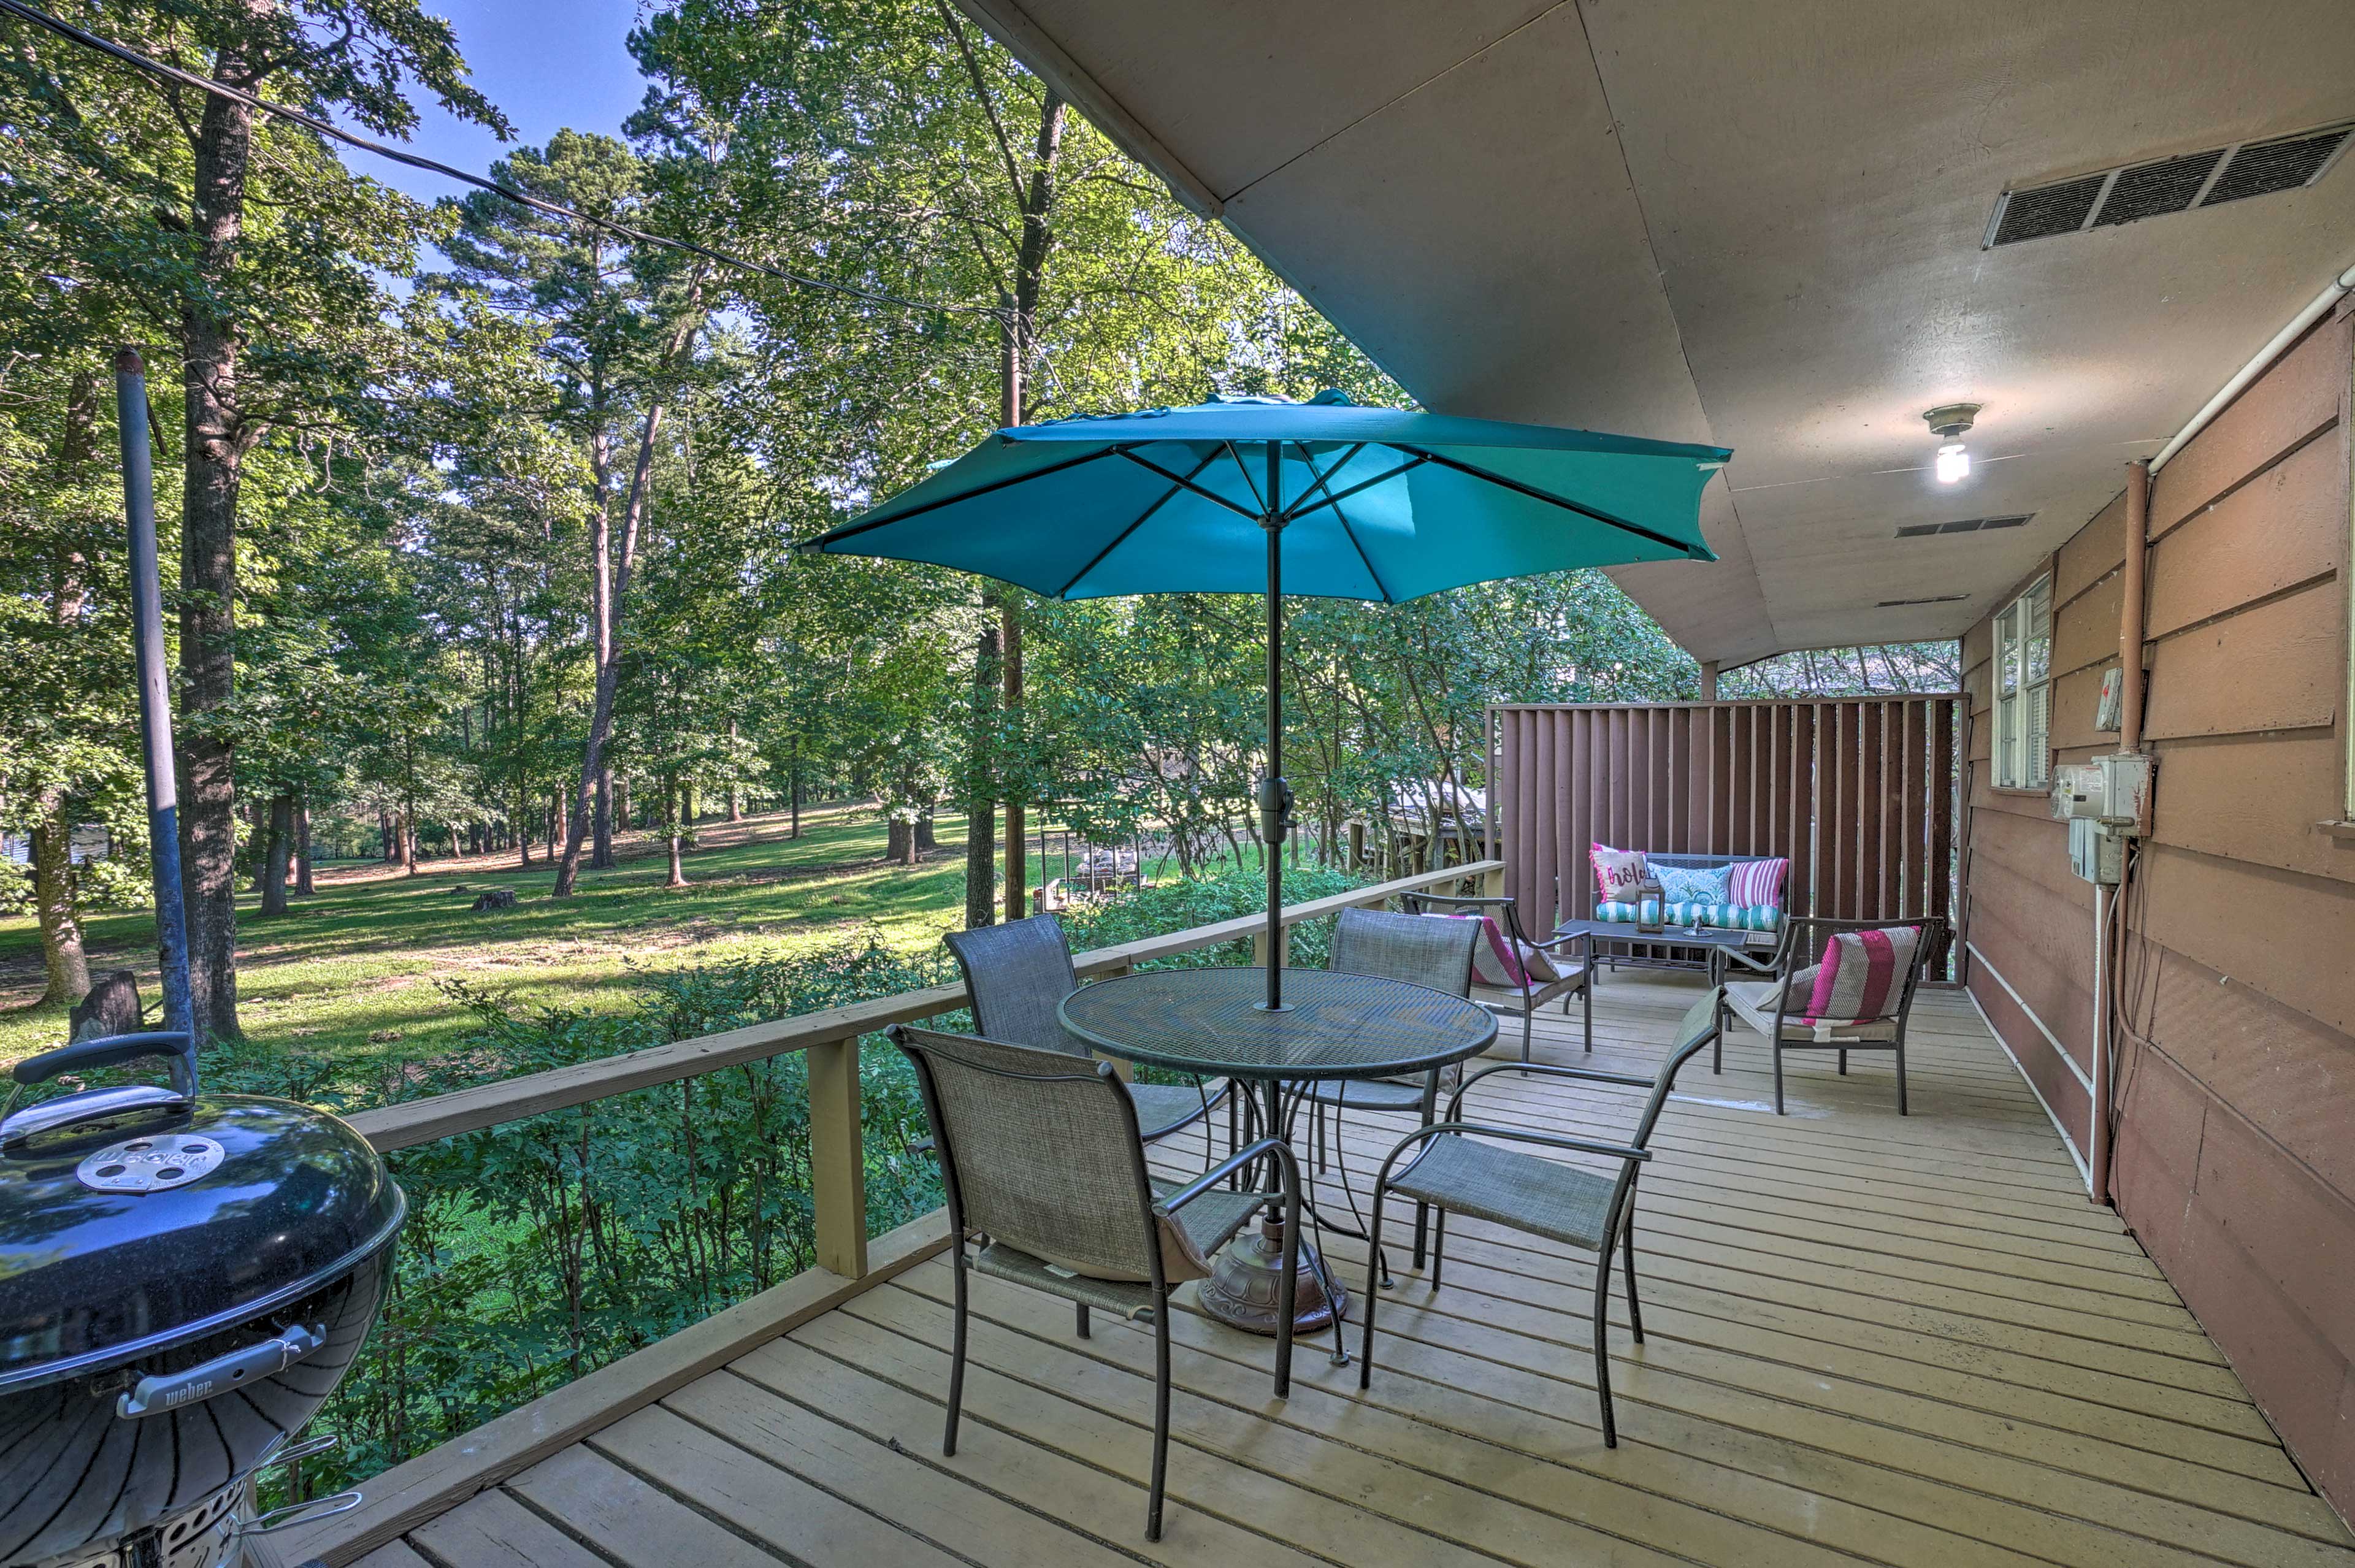 Unwind beside Lake O' the Pines at this waterfront hideaway.